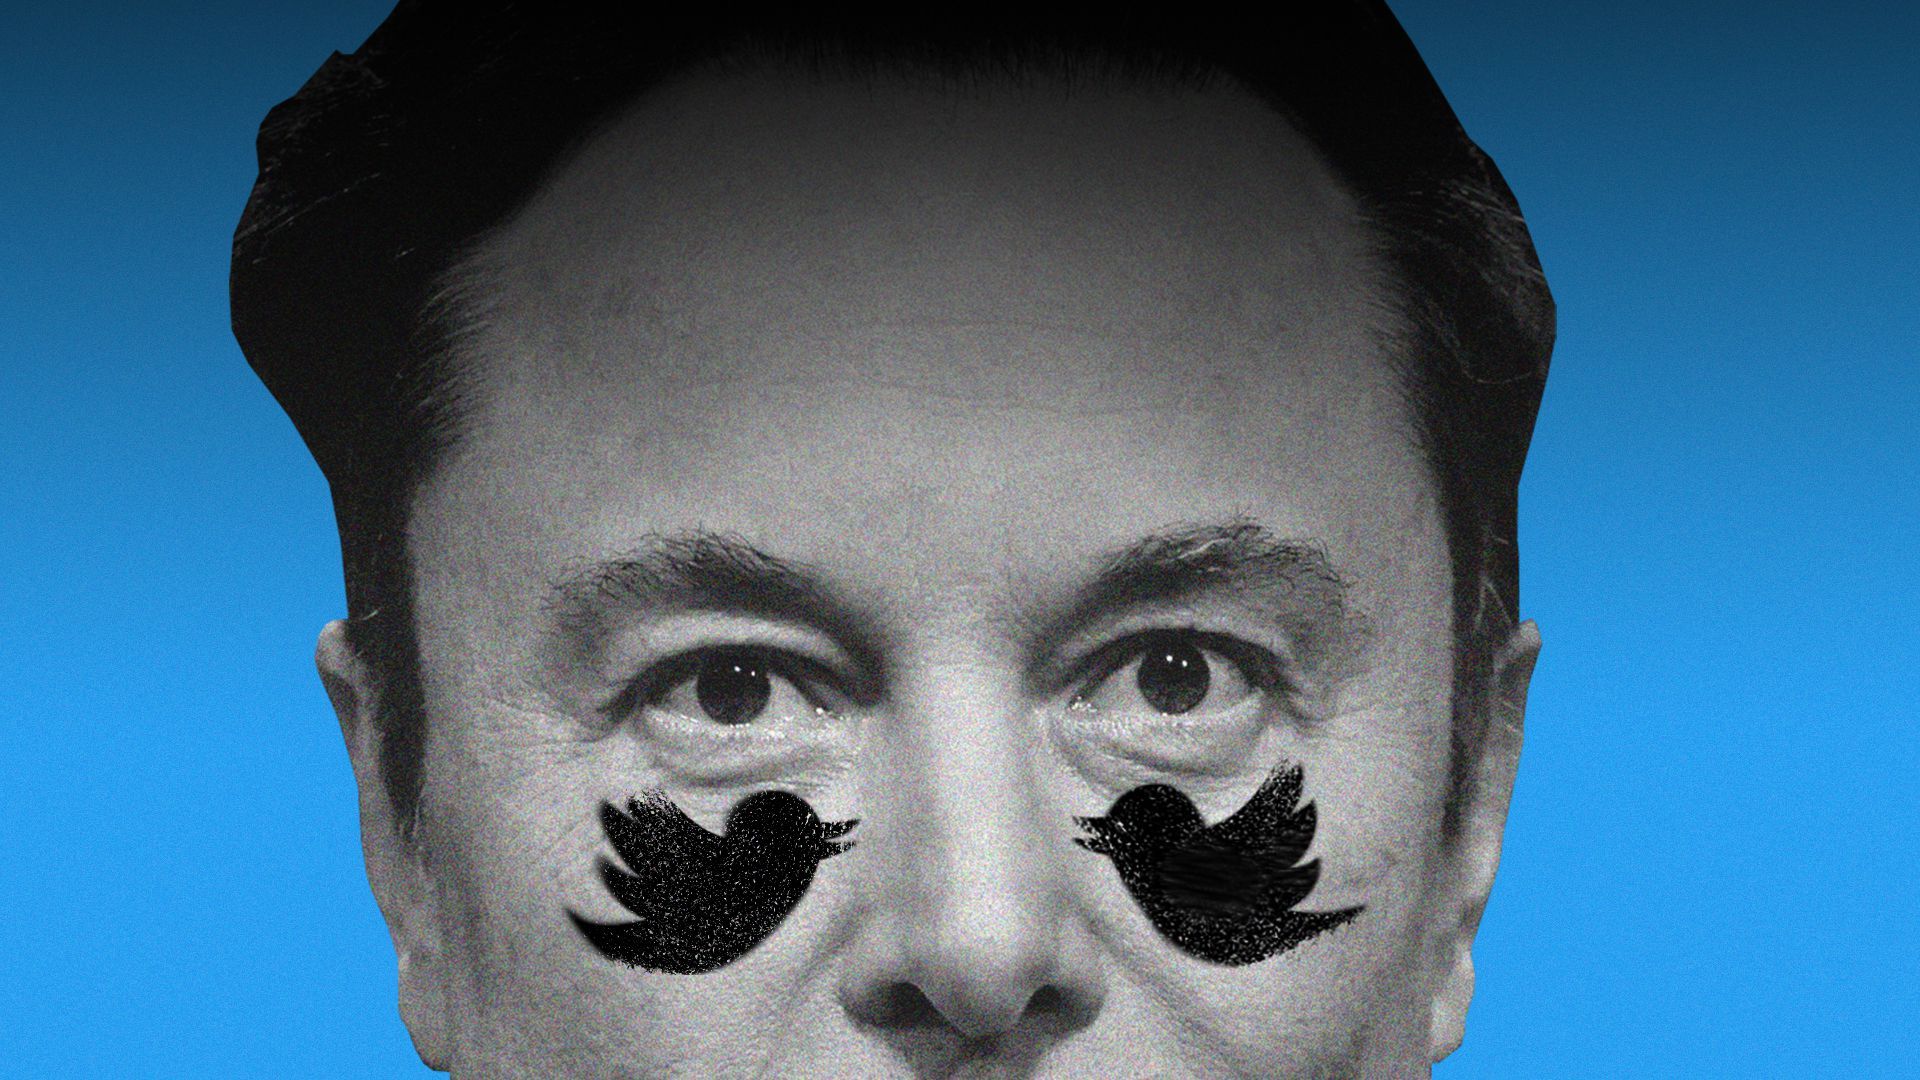 Photo illustration of a close-up of Elon Musk with eye black grease in the shape of the Twitter logo under his eyes